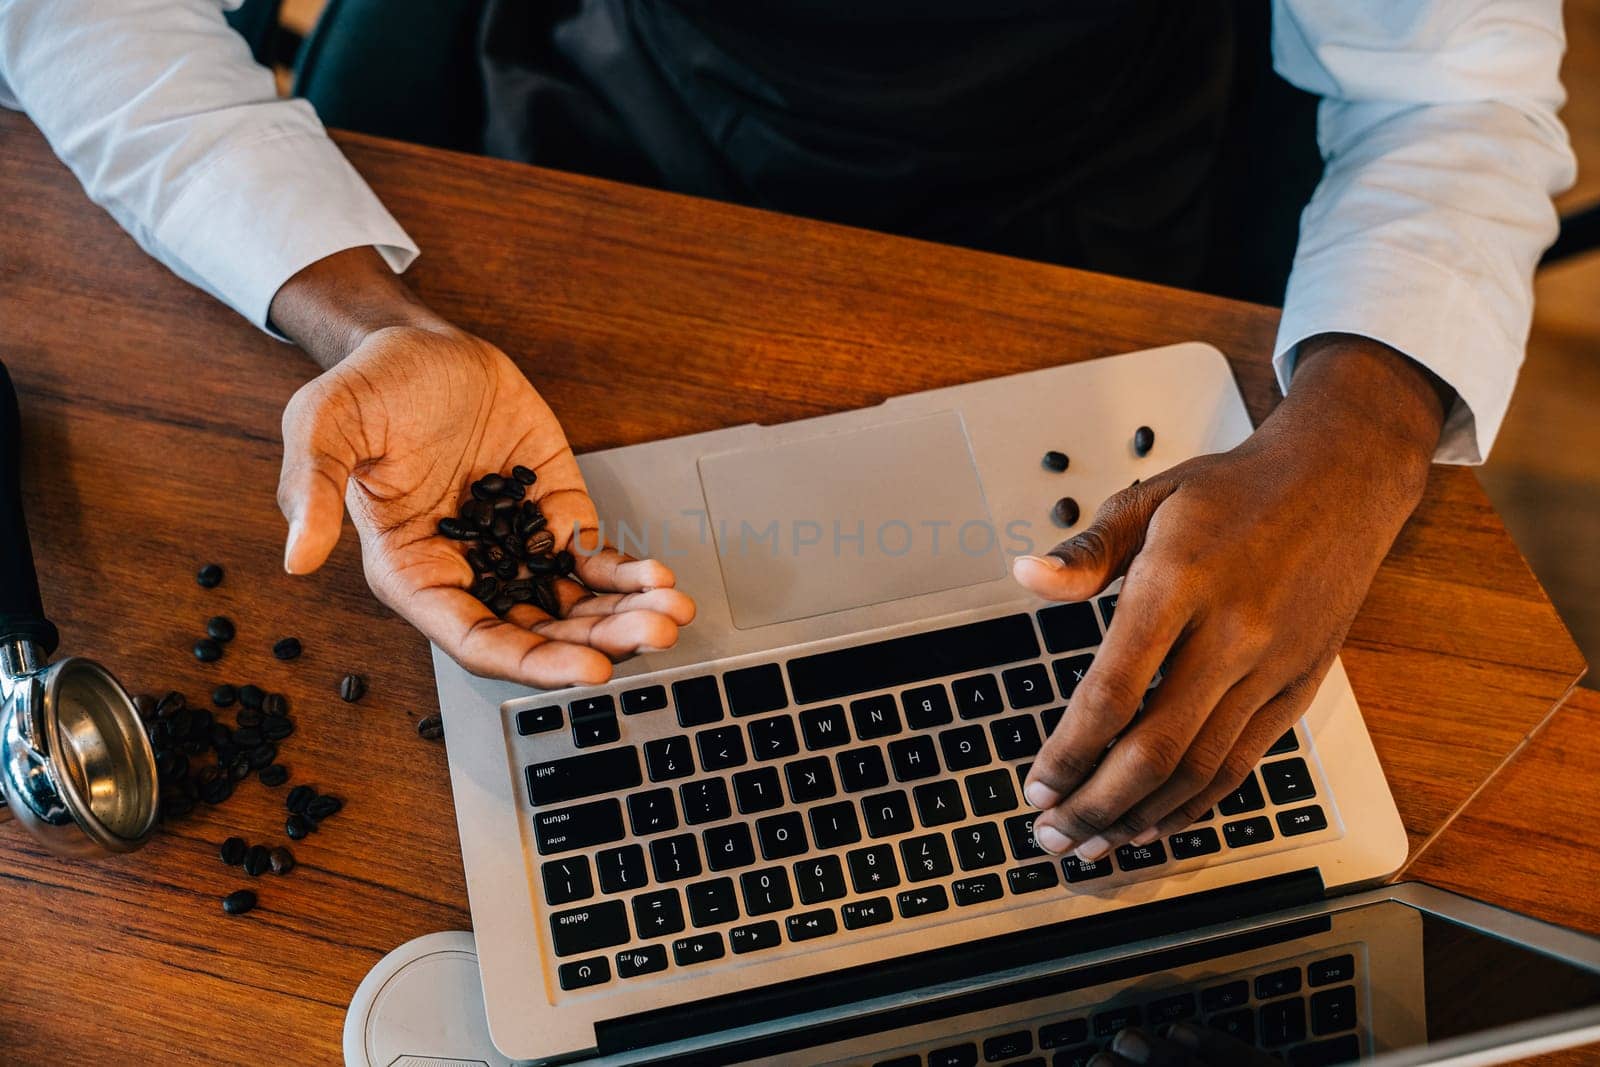 At coffee roastery the business owner and barista utilizes laptop to verify bean quality. With meticulous checks and technology ensuring premium beans is key. Business owner verification is evident. by Sorapop